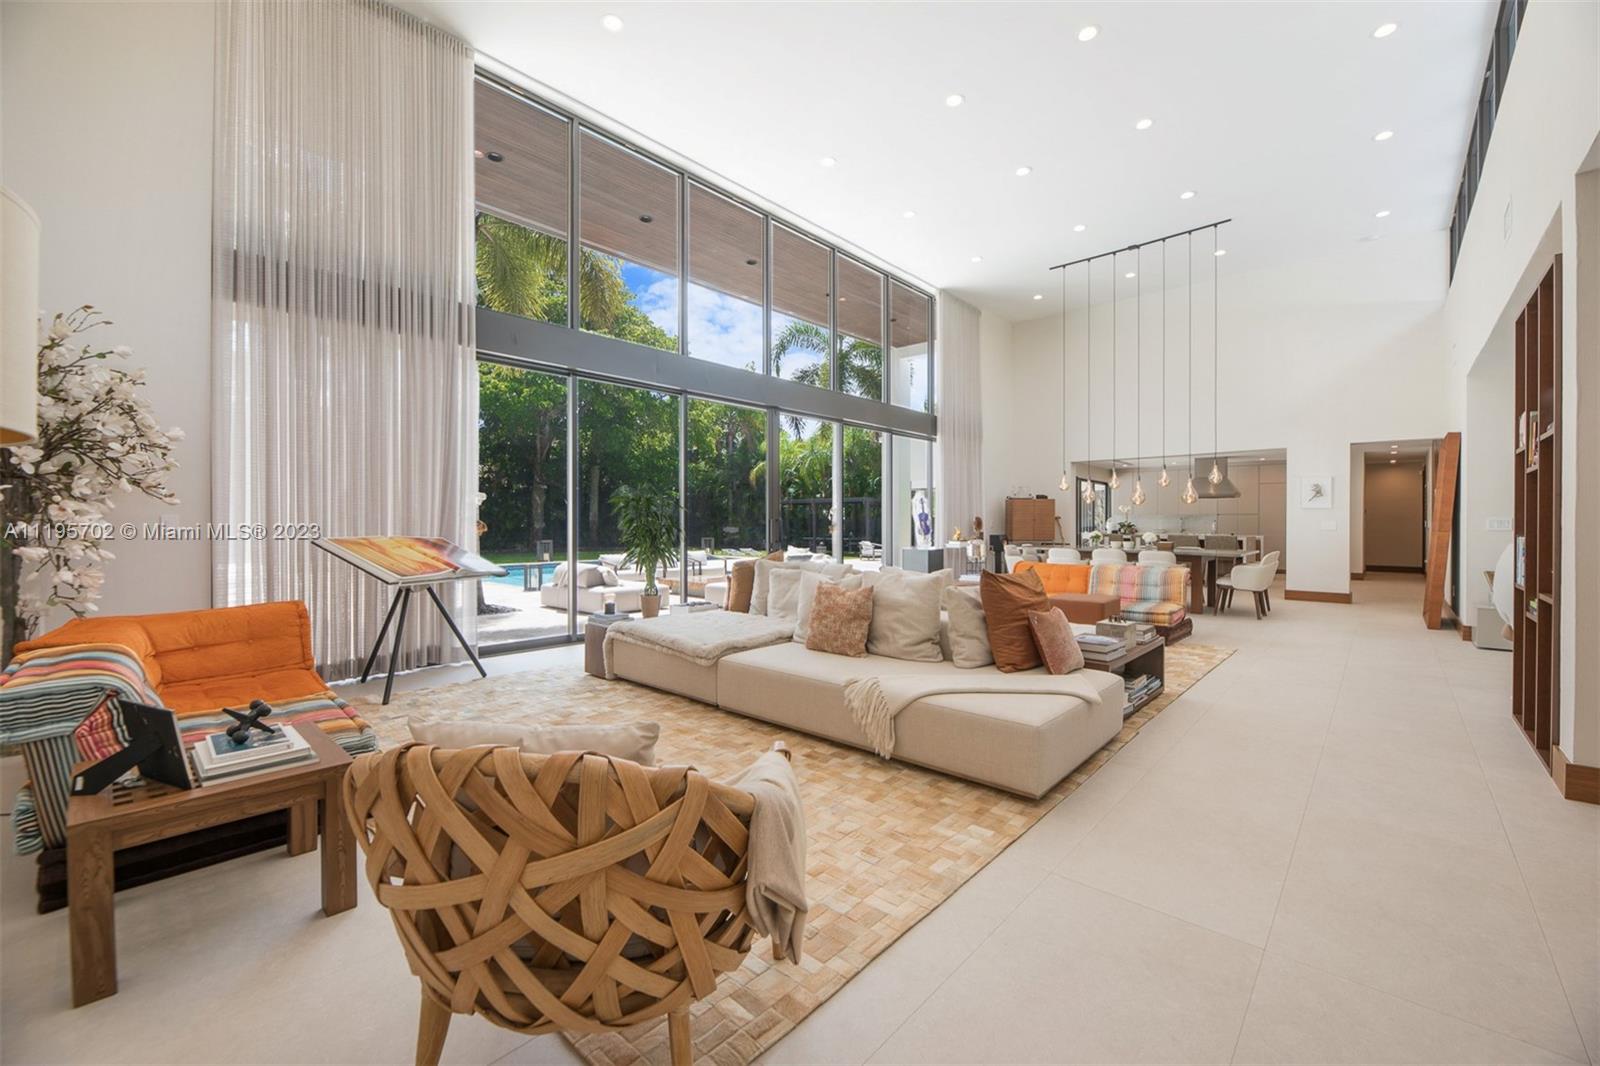 Let The Sun Shine in at this unique residence in North Pinecrest. The home has 4 bedrooms w. custom-made walk-in closets & private baths. The living areas are plentiful & host large gatherings. The custom-designed bar w.a Subzero cooler provides a richly textured backdrop for entertainment. The kitchen boasts a Wolf dual fuel range w. hood, microwave, Sub Zero refrigerator & freezer. 2 oversized kitchen islands & high-wide custom-made sliding glass doors lead to stunning outdoor areas. The terrace, pool, & summer kitchen are ideal for gatherings. Nestled on an acre lot in a park-like setting w. abundant flora & fruit trees. You are cordially invited to visit this show stopper *Living area 3,989.60 Sqft Entry 125.30 Sqft Garage 555.00 Sqft Real porch 498.45 Sqft Total Area 5,168.35 Sqft*